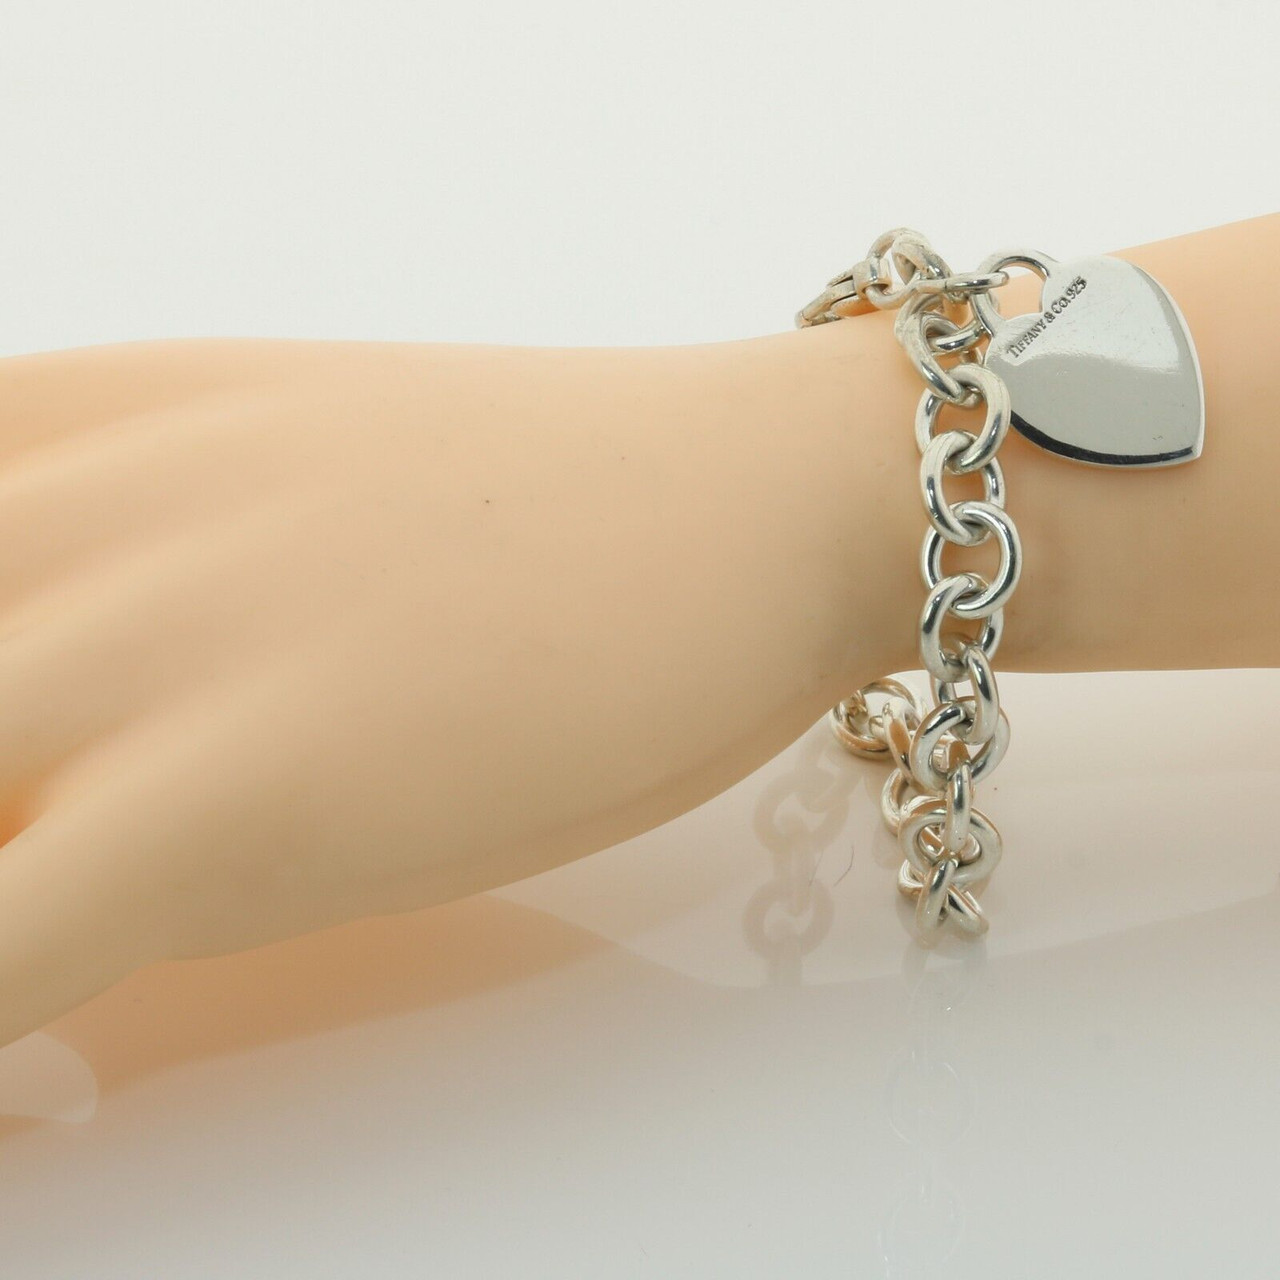 Heart Chain Solid Sterling Silver Bracelet Made in Italy